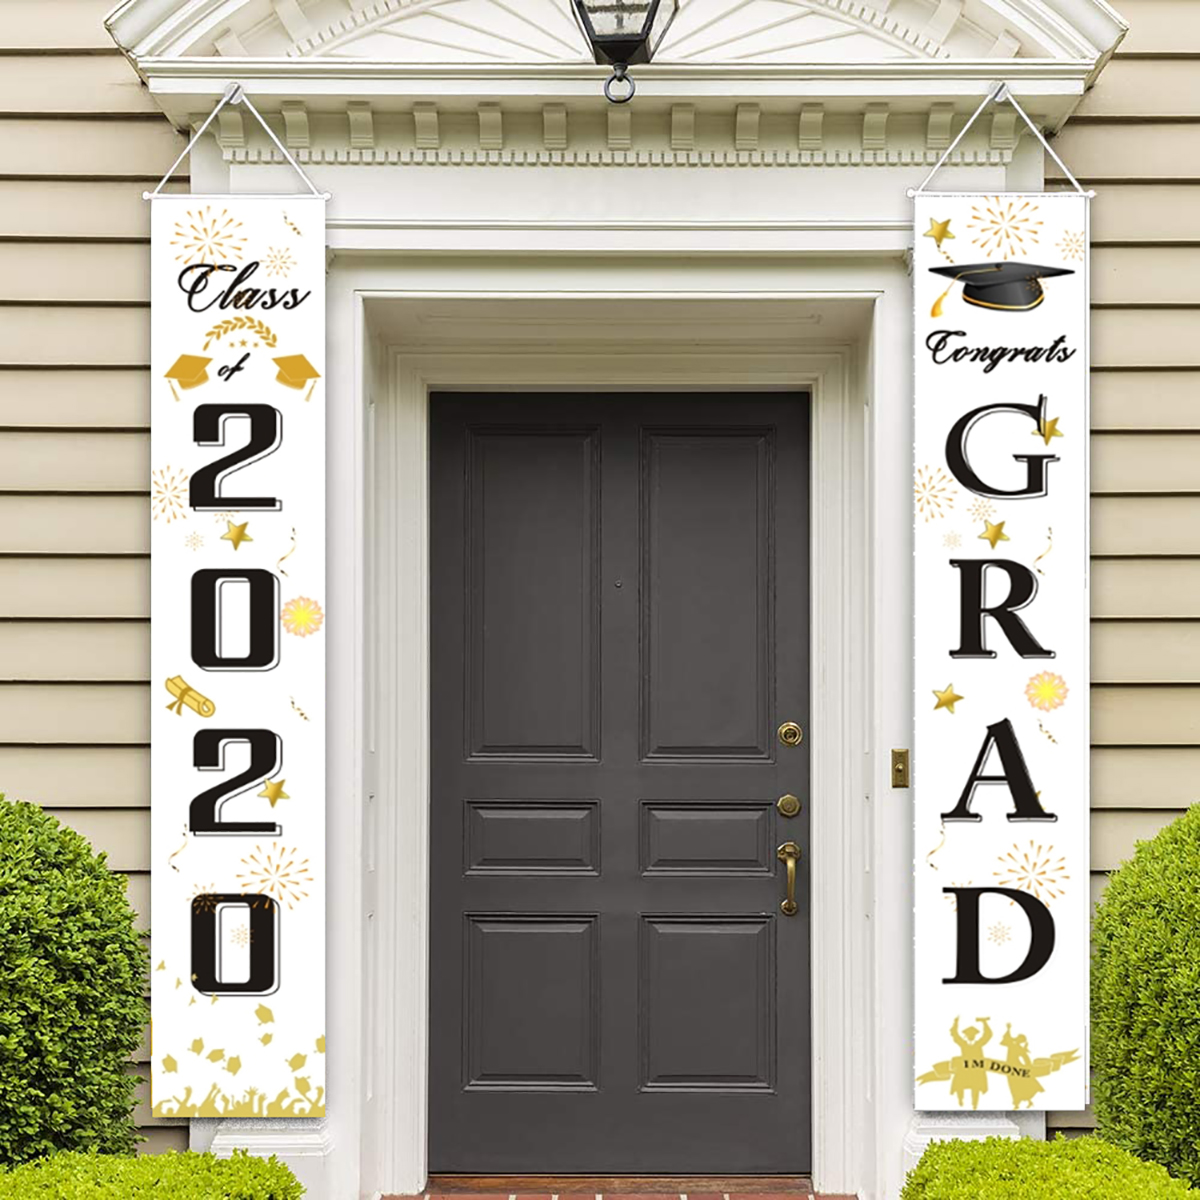 Wall-Mounted-Graduation-Banner-Door-Curtain-Dormitory-Removable-Sticker-for-Graduatiing-Ceremony-1687076-3